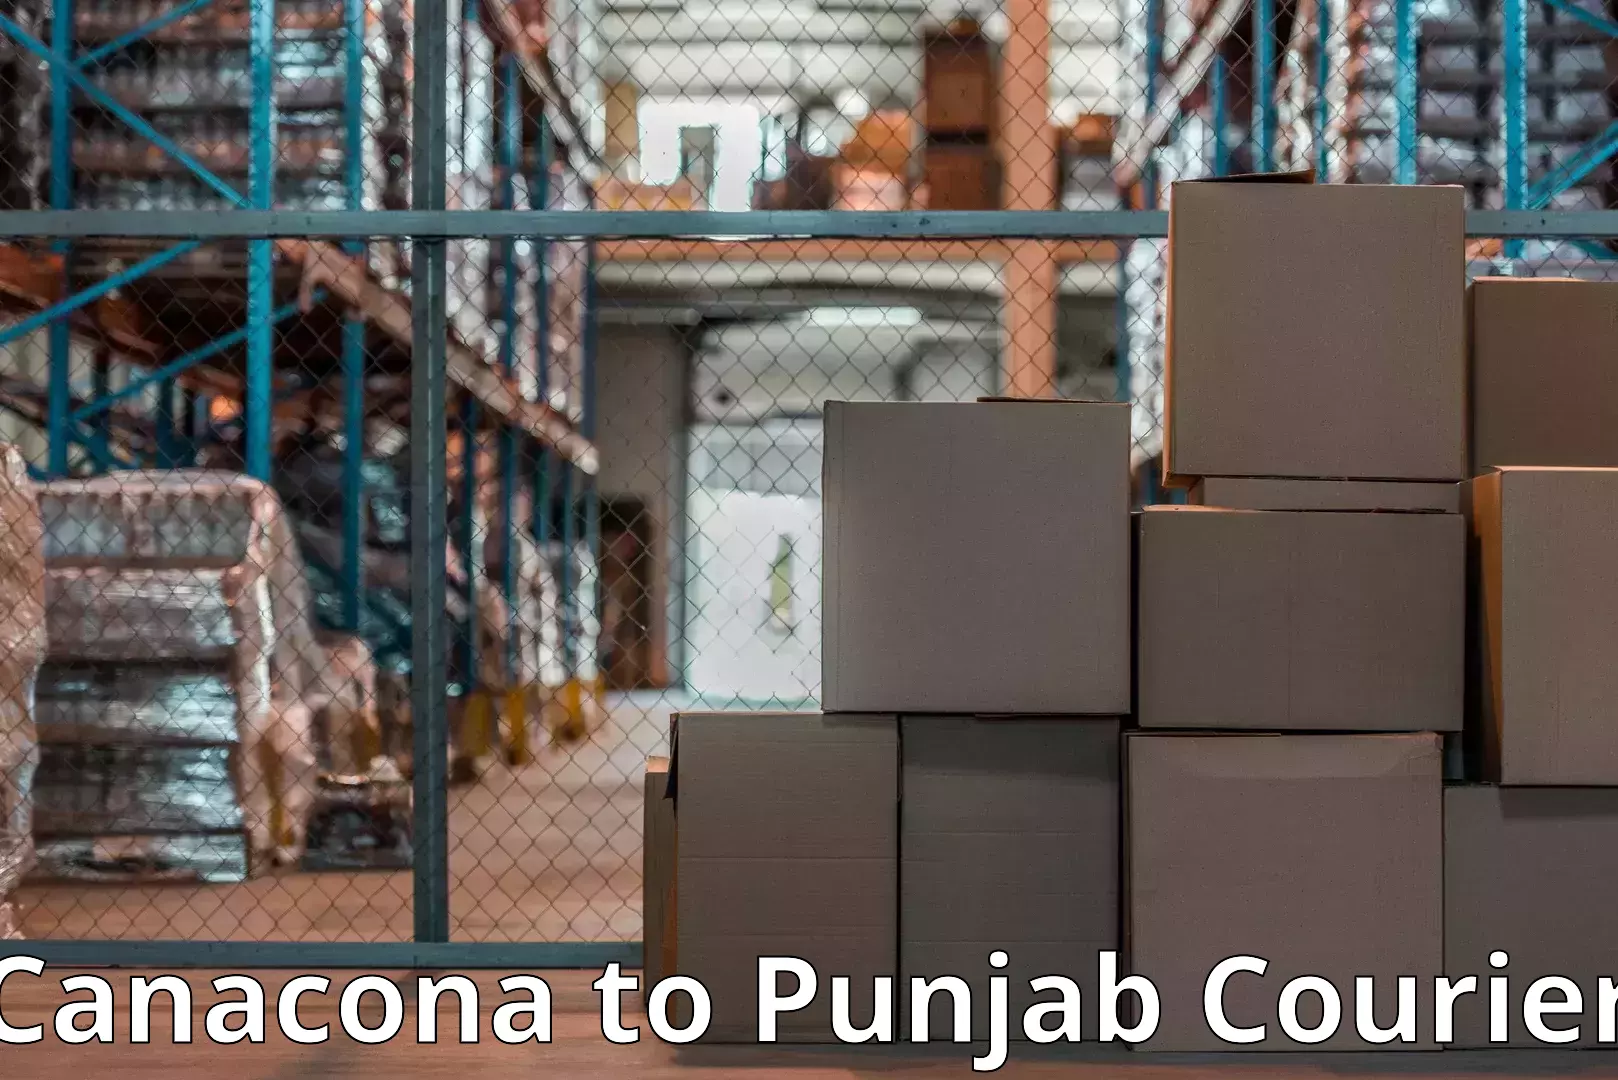 Full home relocation services Canacona to Punjab